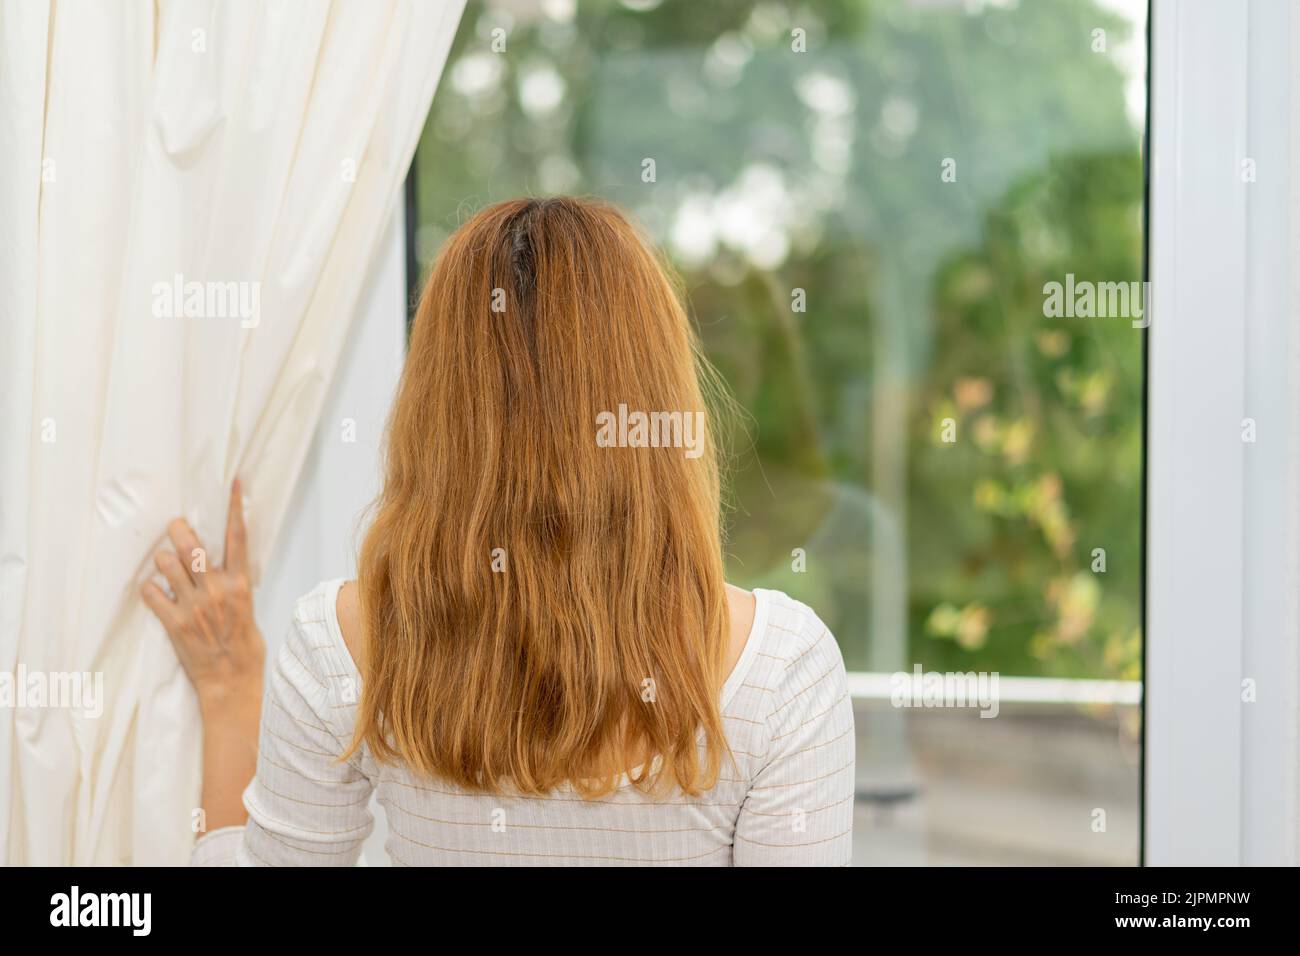 Young woman looks through the window, Stock Photo